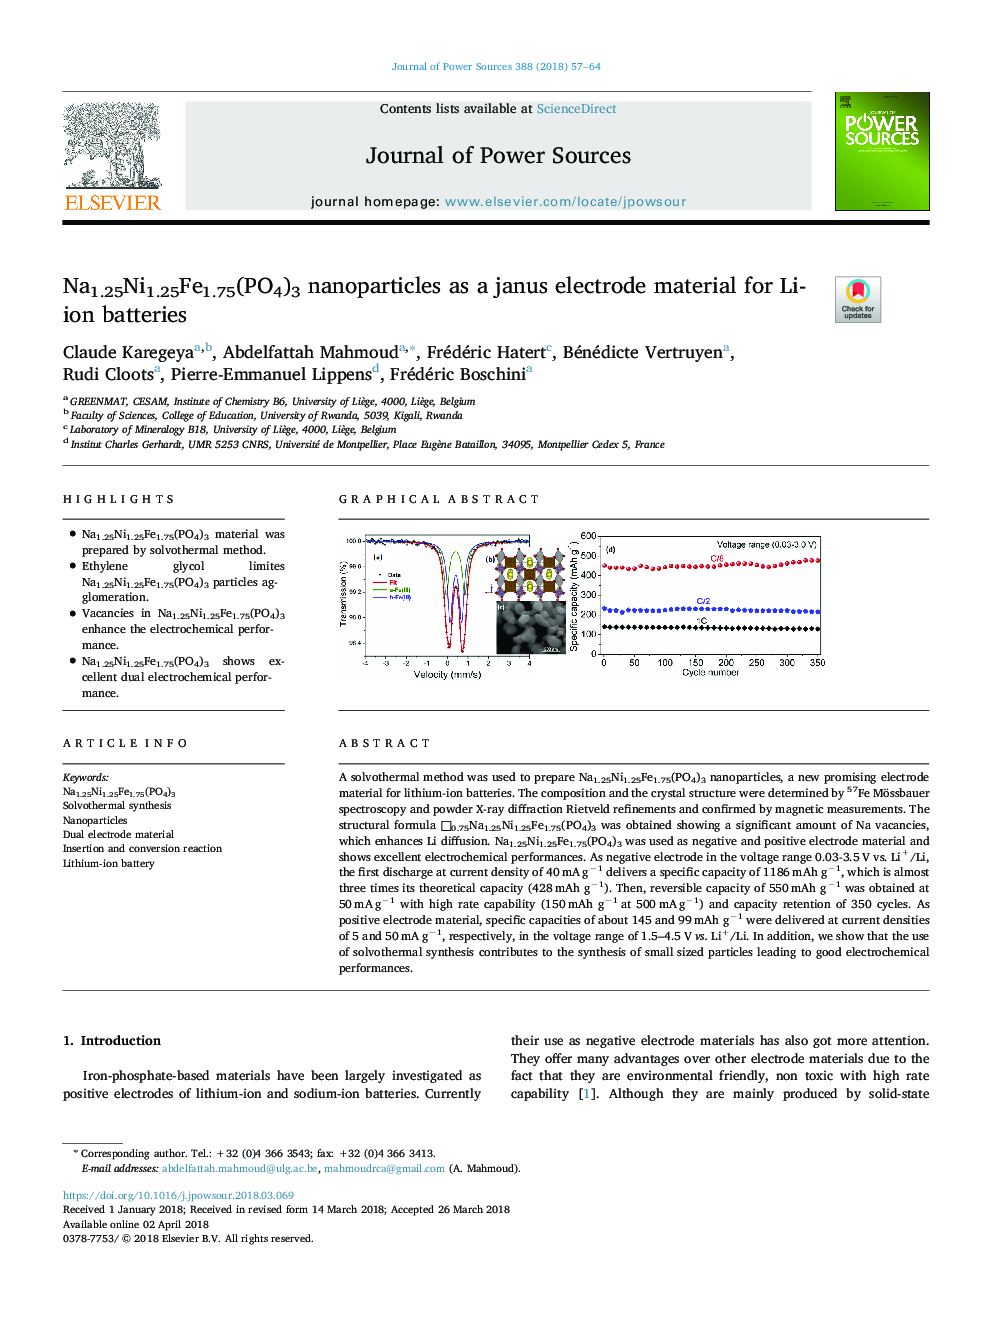 Na1.25Ni1.25Fe1.75(PO4)3 nanoparticles as a janus electrode material for Li-ion batteries